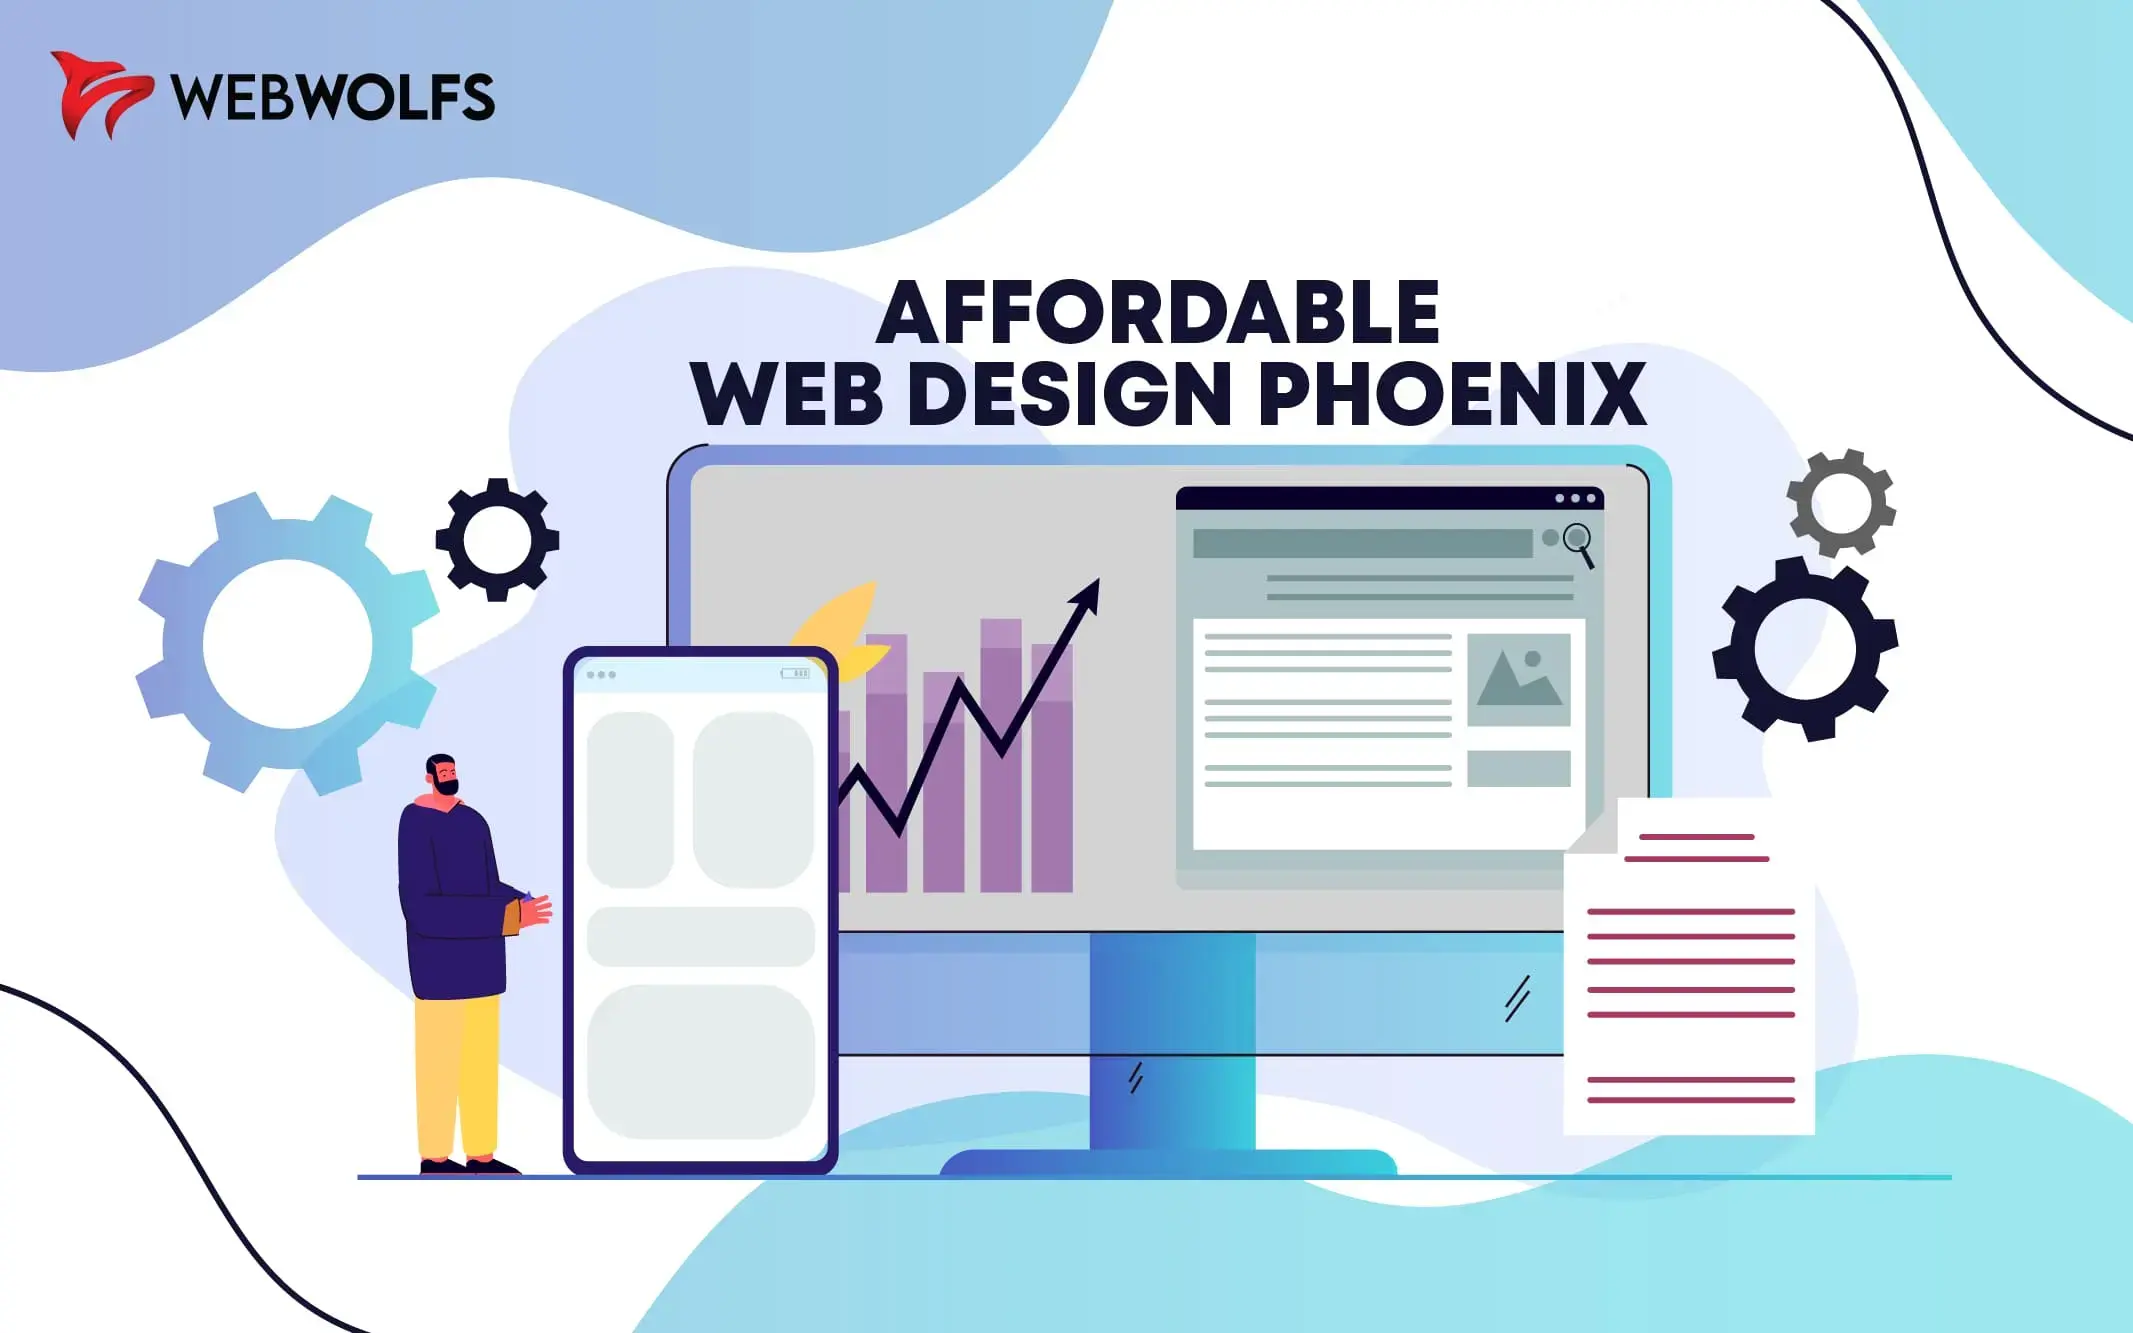 Top Mistakes to Avoid in Affordable Web Design Phoenix Projects